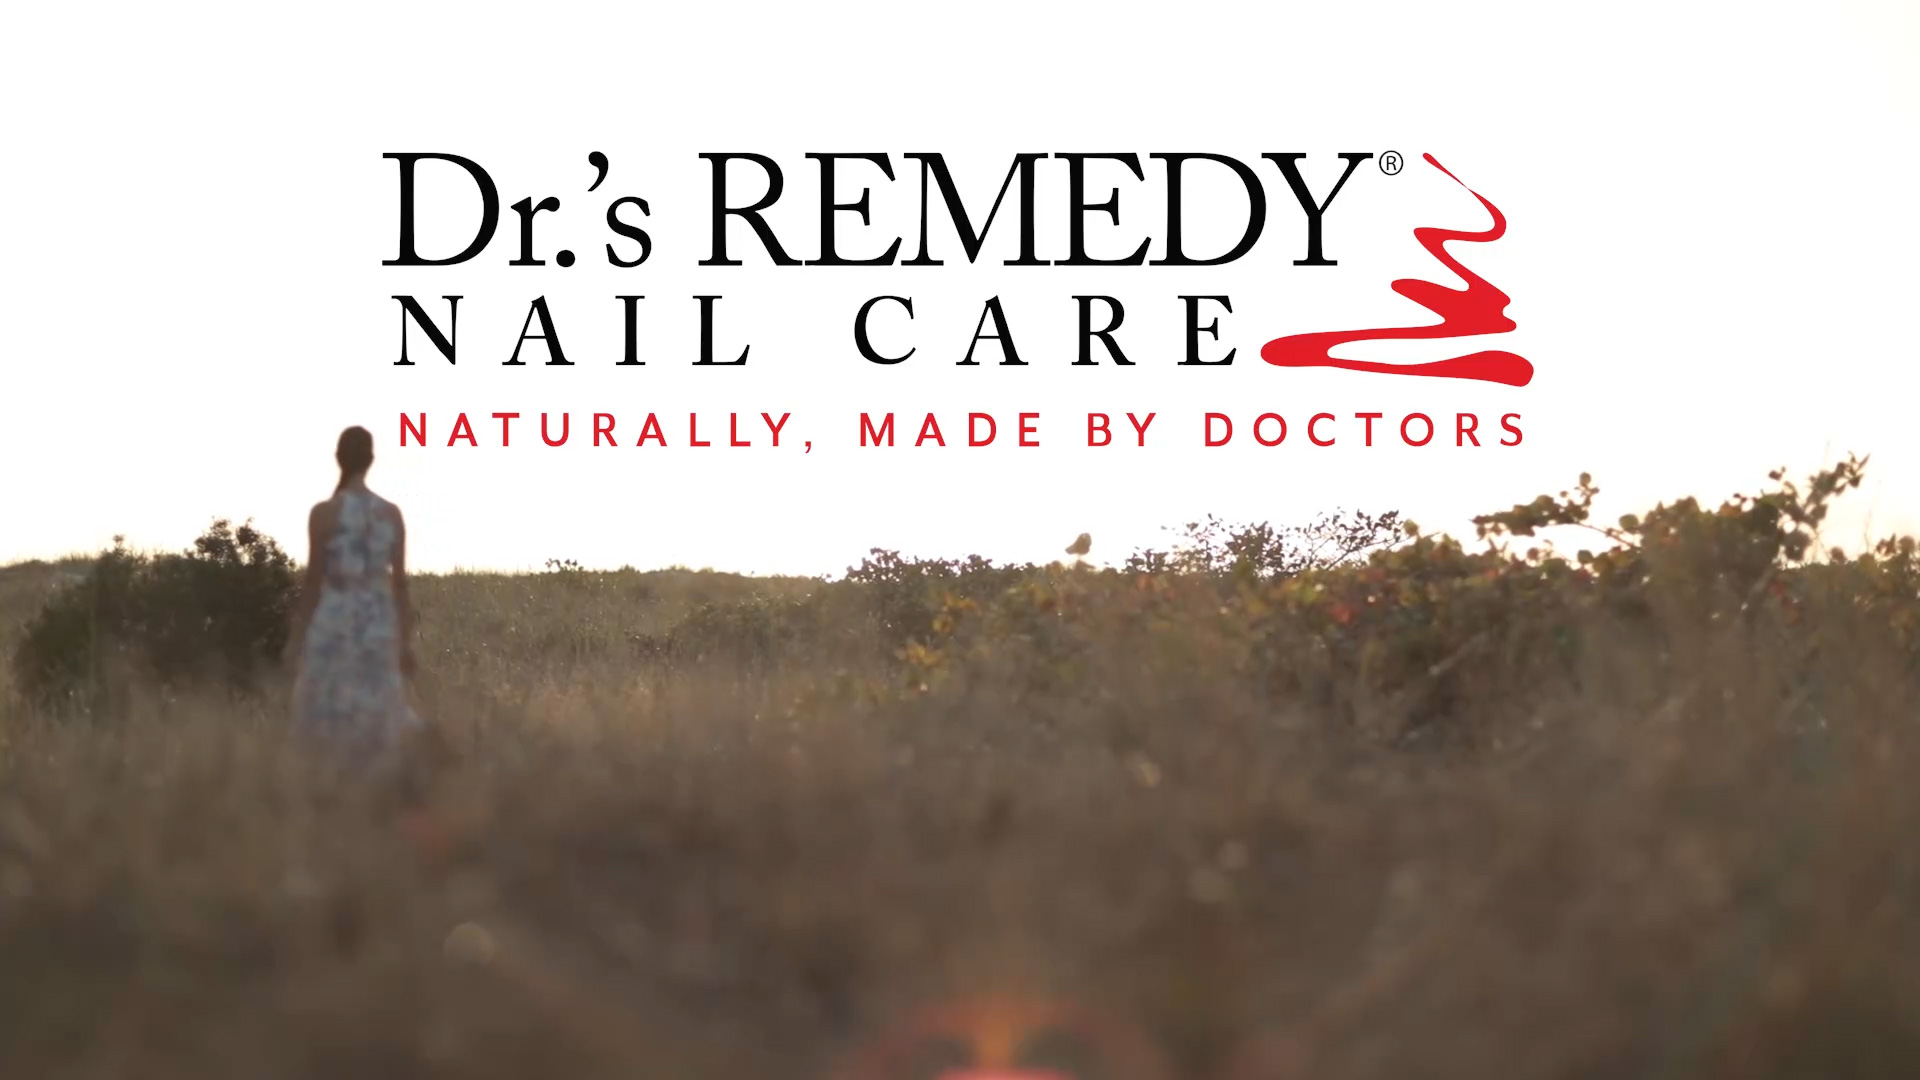 Dr's REMEDY Nail Care